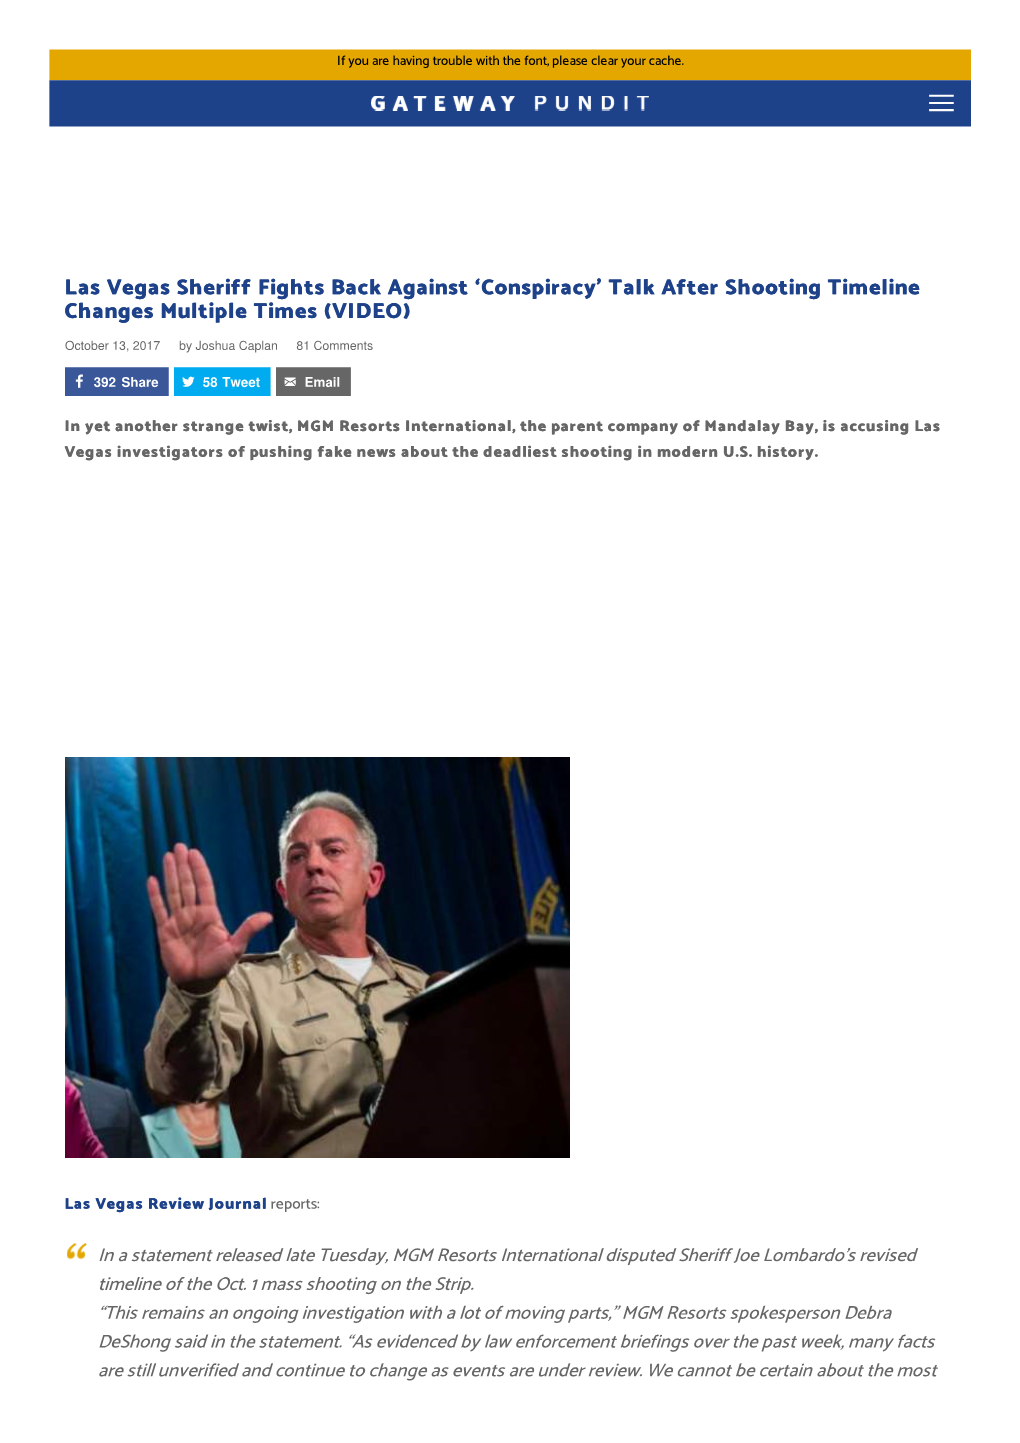 Las Vegas Sheriff Fights Back Against 'Conspiracy'